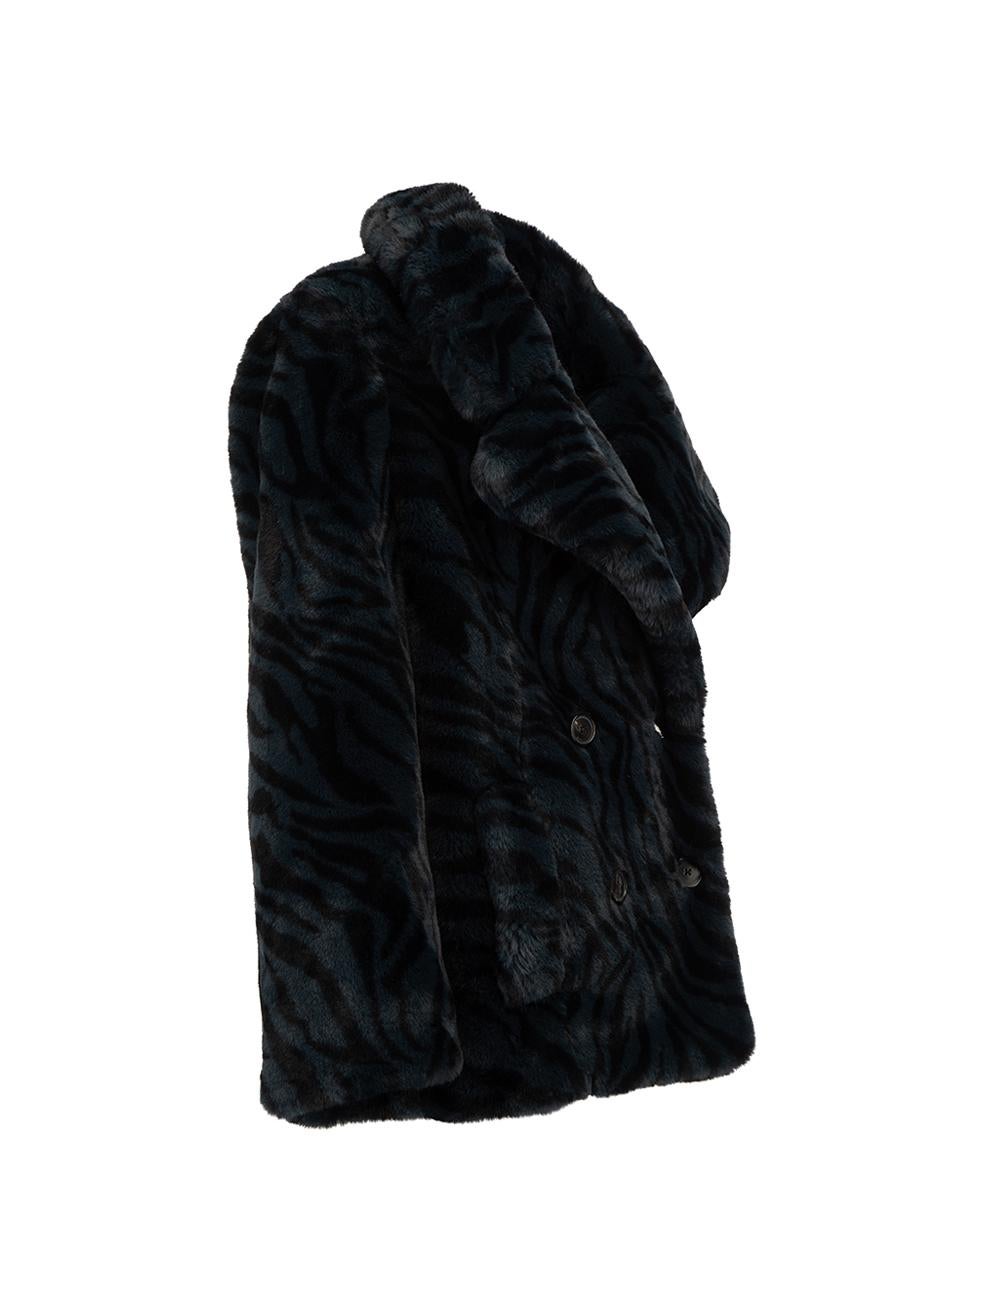 CONDITION is Very good. Minimal wear to coat is evident. Loose buttons is seen on this used Zadig & Voltaire designer resale item. Details Blue Faux fur Short coat Tiger pattern Double breasted Front side pockets Made in China Composition 100%